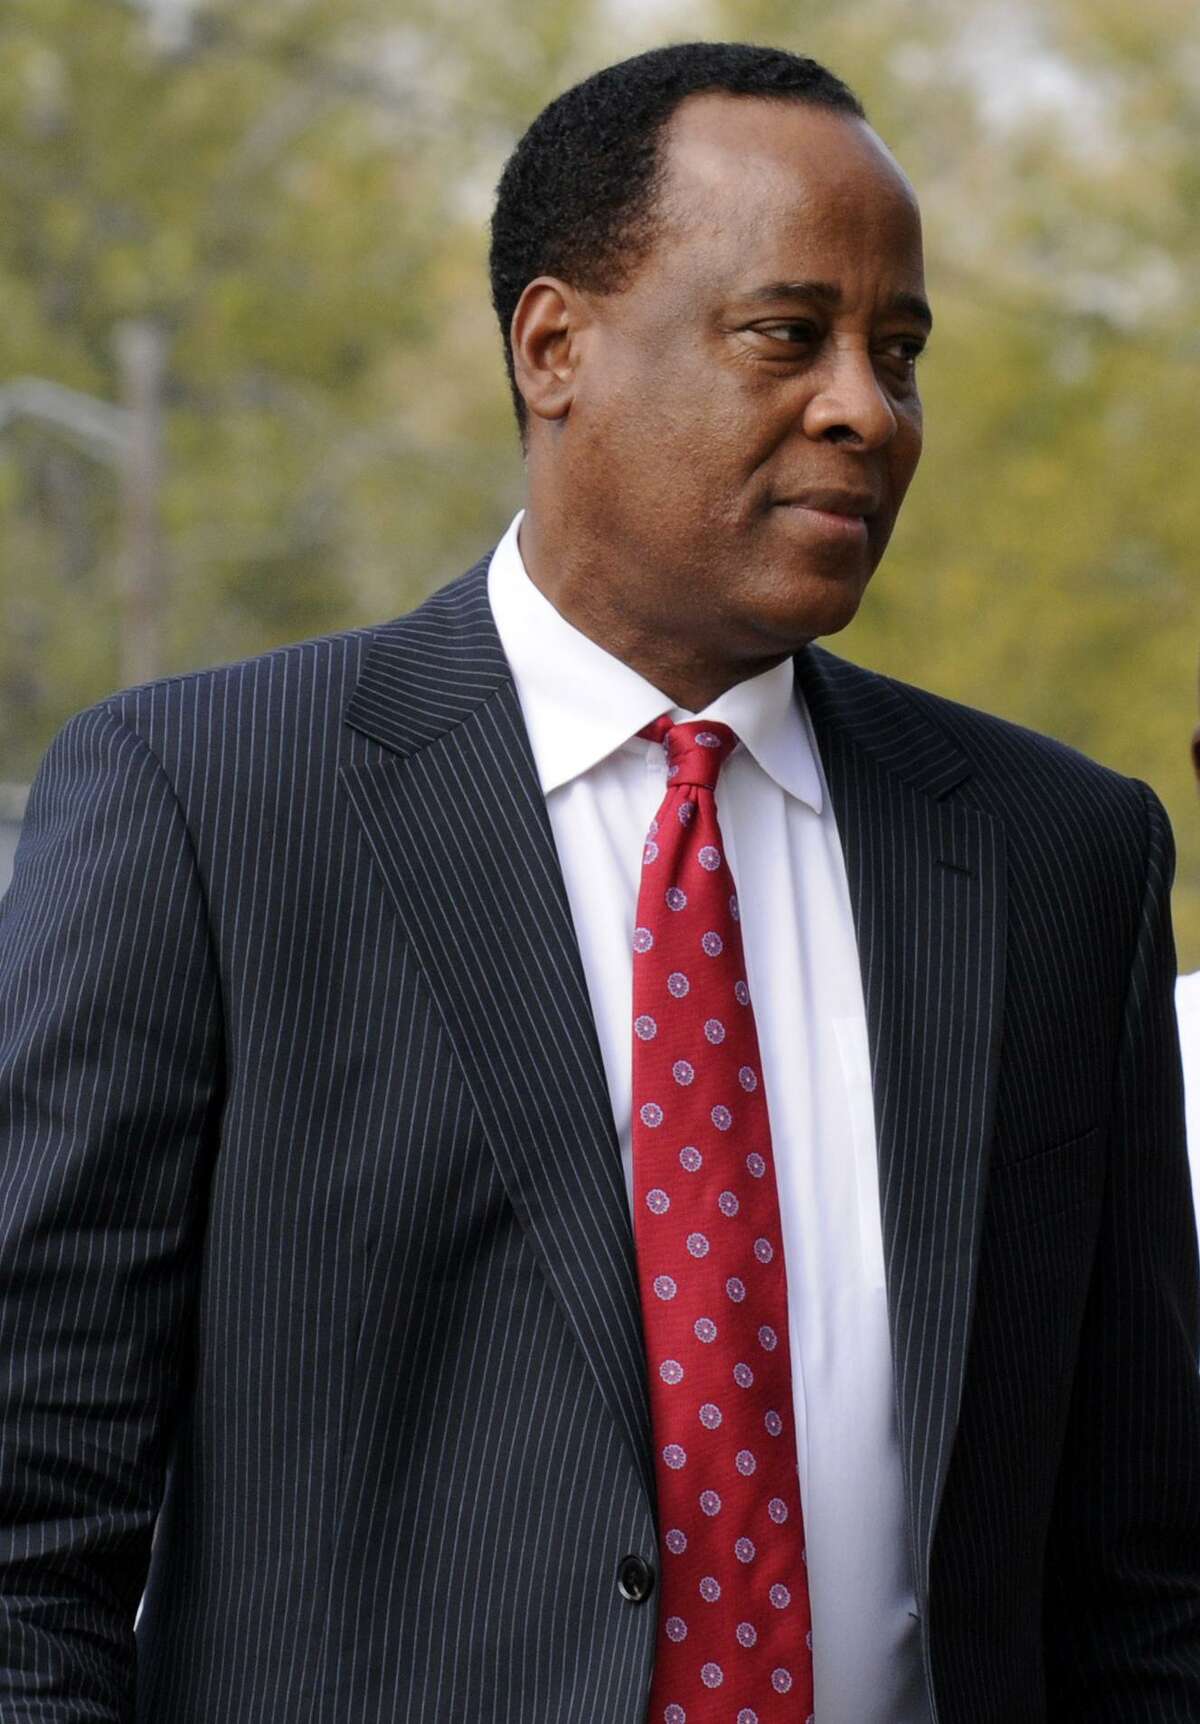 FILE - In this Nov. 23, 2009 file picture, Dr. Conrad Murray arrives at his clinic in Houston. Michael Jackson's physician has arrived in Los Angeles in anticipation of a decision from the district attorney's office on whether to charge him for the singer's death, a spokeswoman said Tuesday. (AP Photo/Pat Sullivan, File)